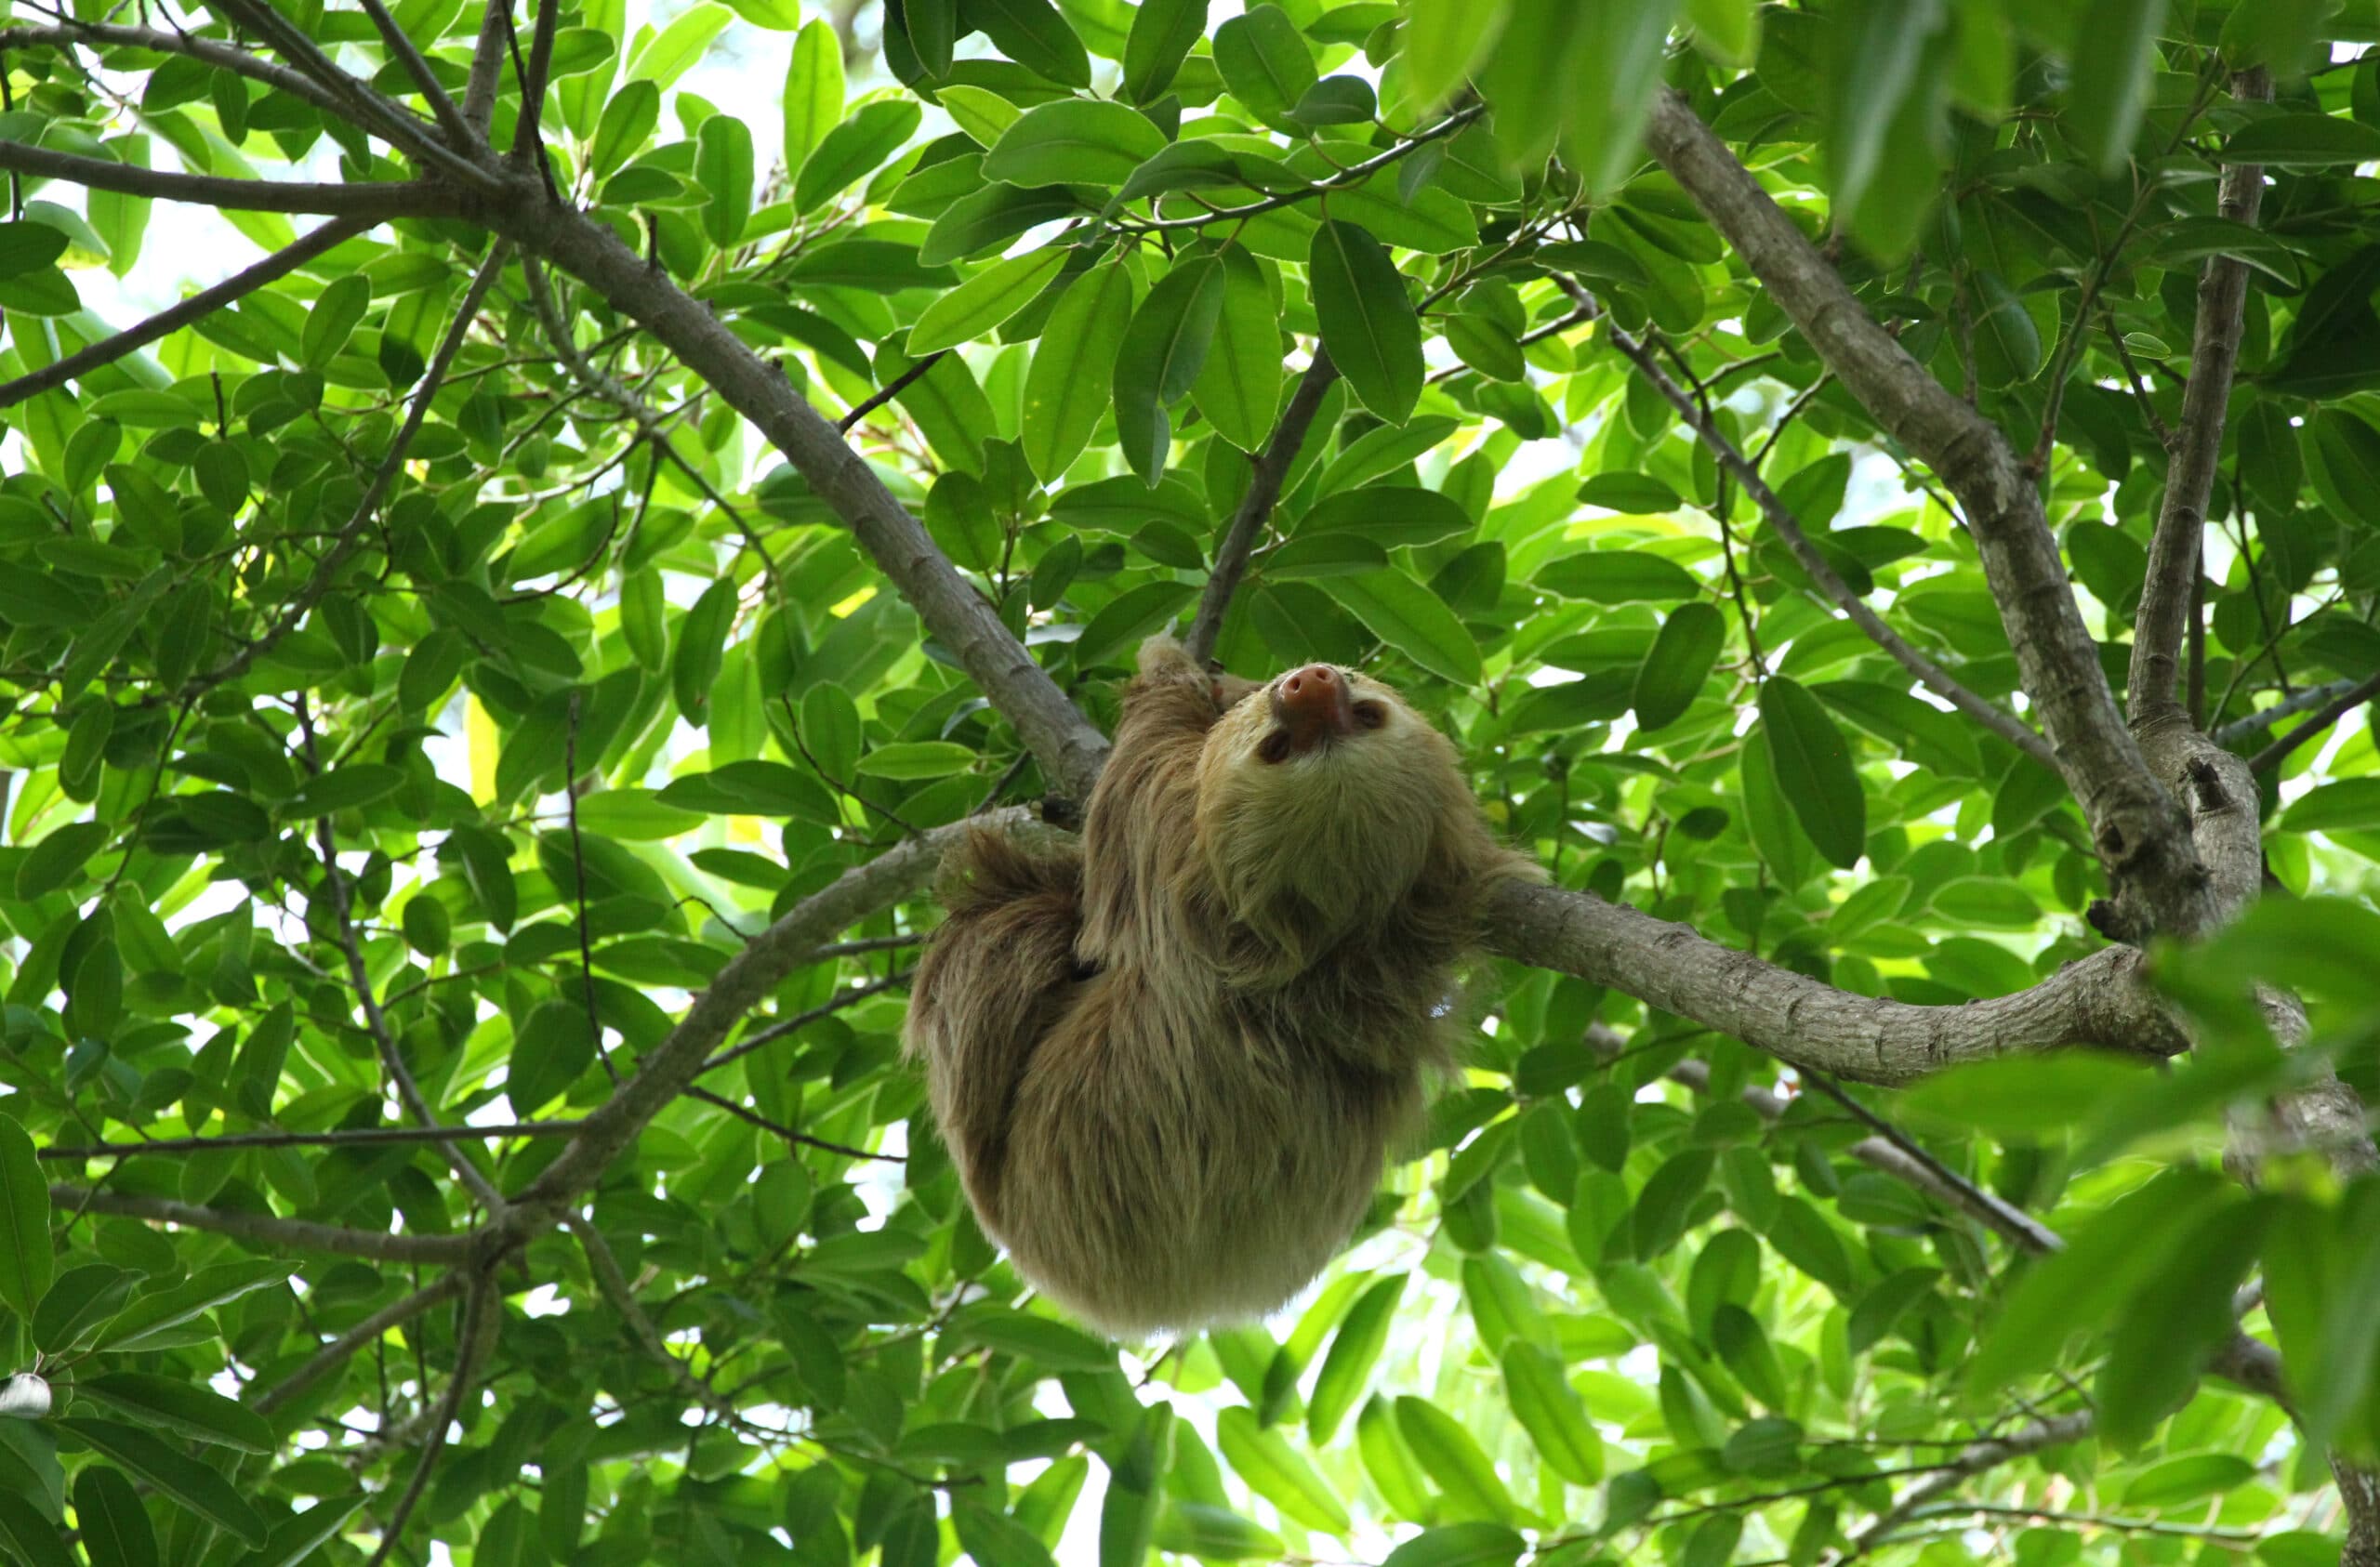 Hanging with the sloths in Costa Rica